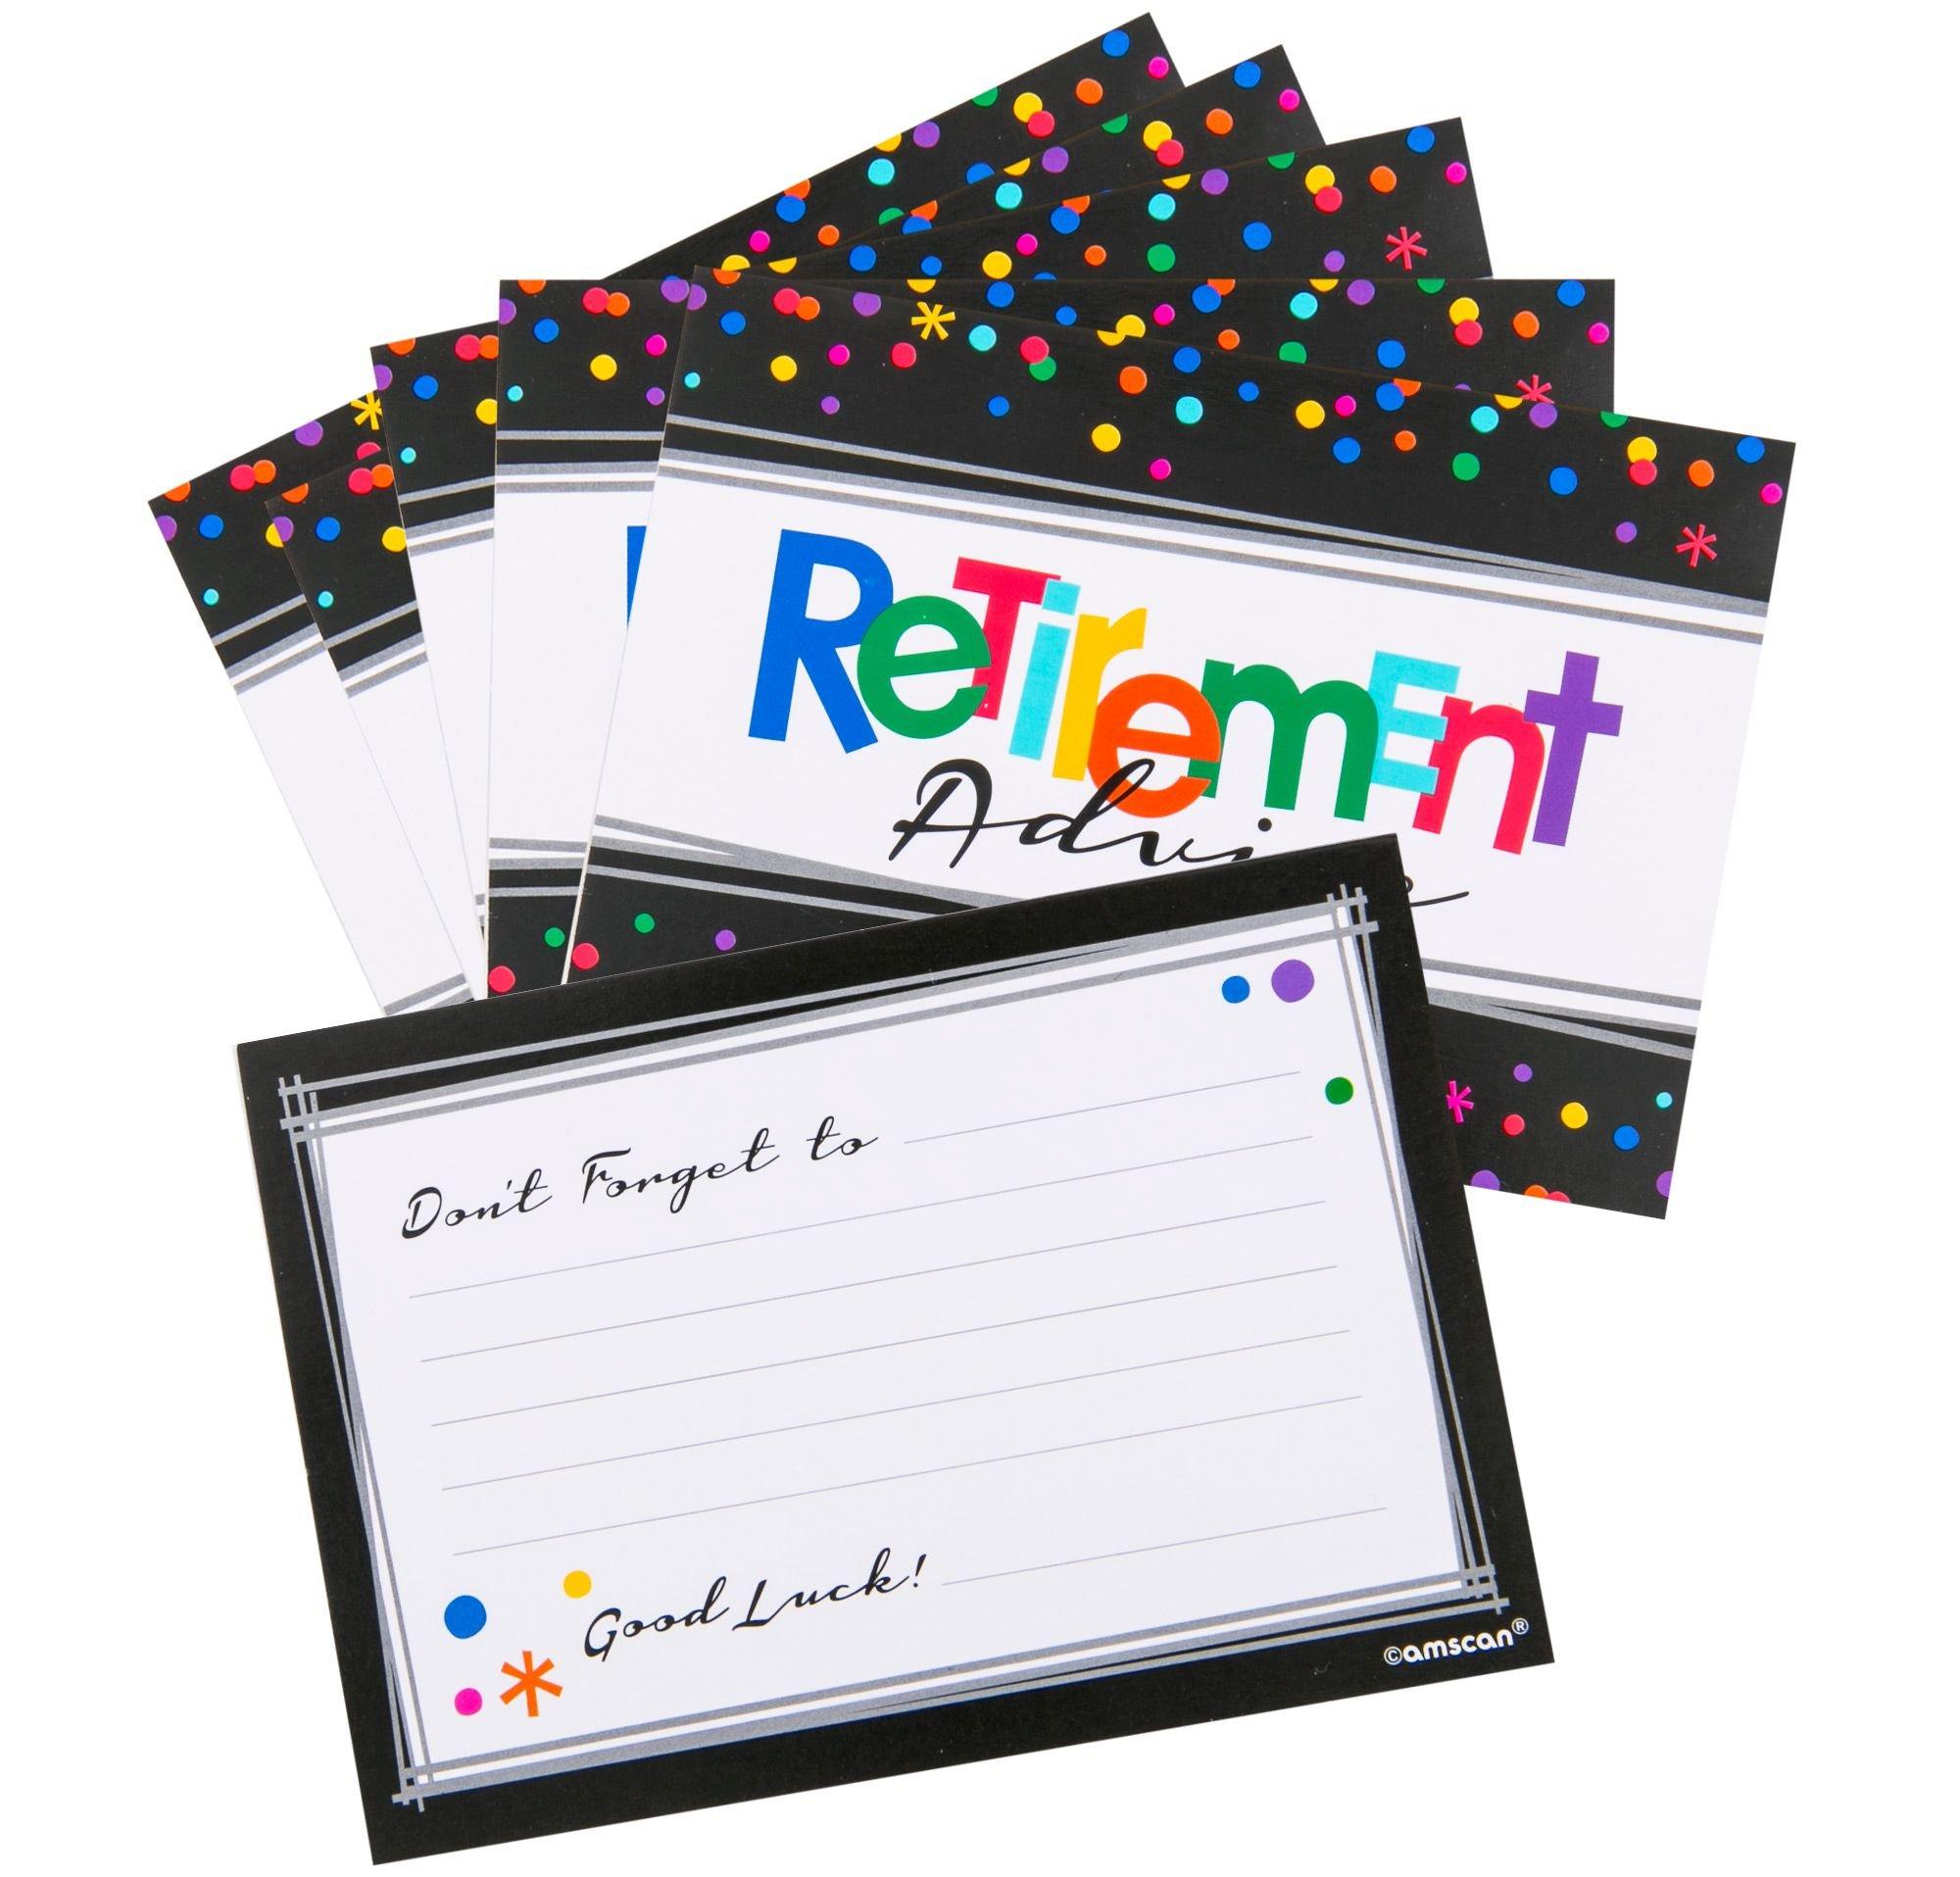 Officially Retired Cardstock Advice Cards, 5in x 3.5in, 24ct